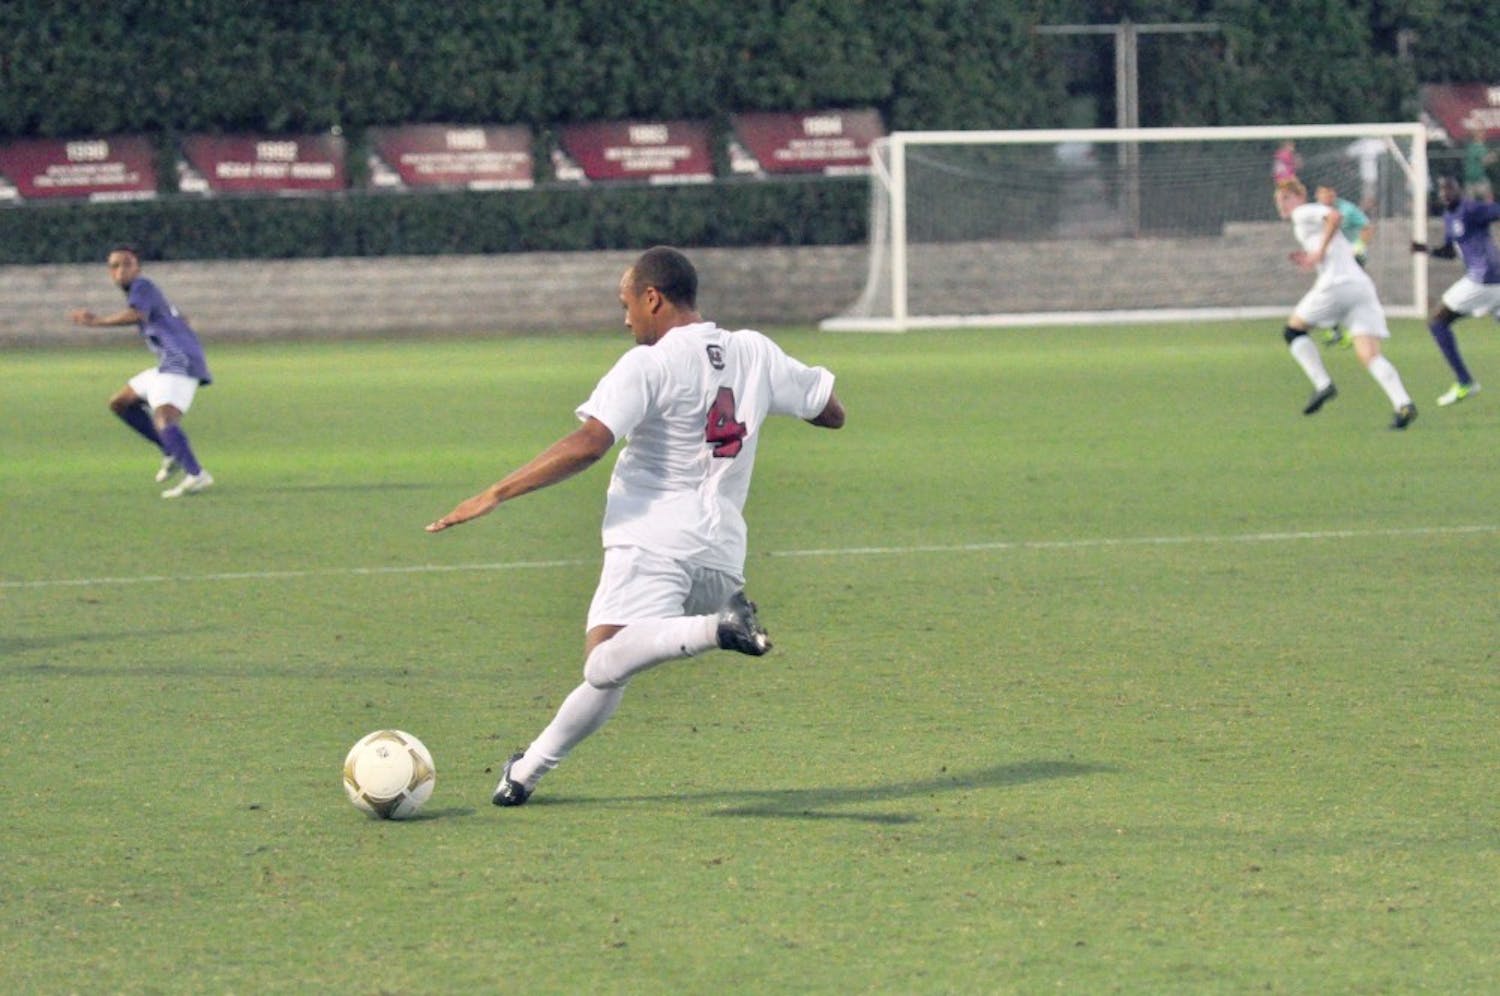 	Freshman Ive Burnett scored the first goal of his career in South Carolina’s last match, netting the Gamecocks’ only score in the team’s 3-1 loss at Coastal Carolina Tuesday.